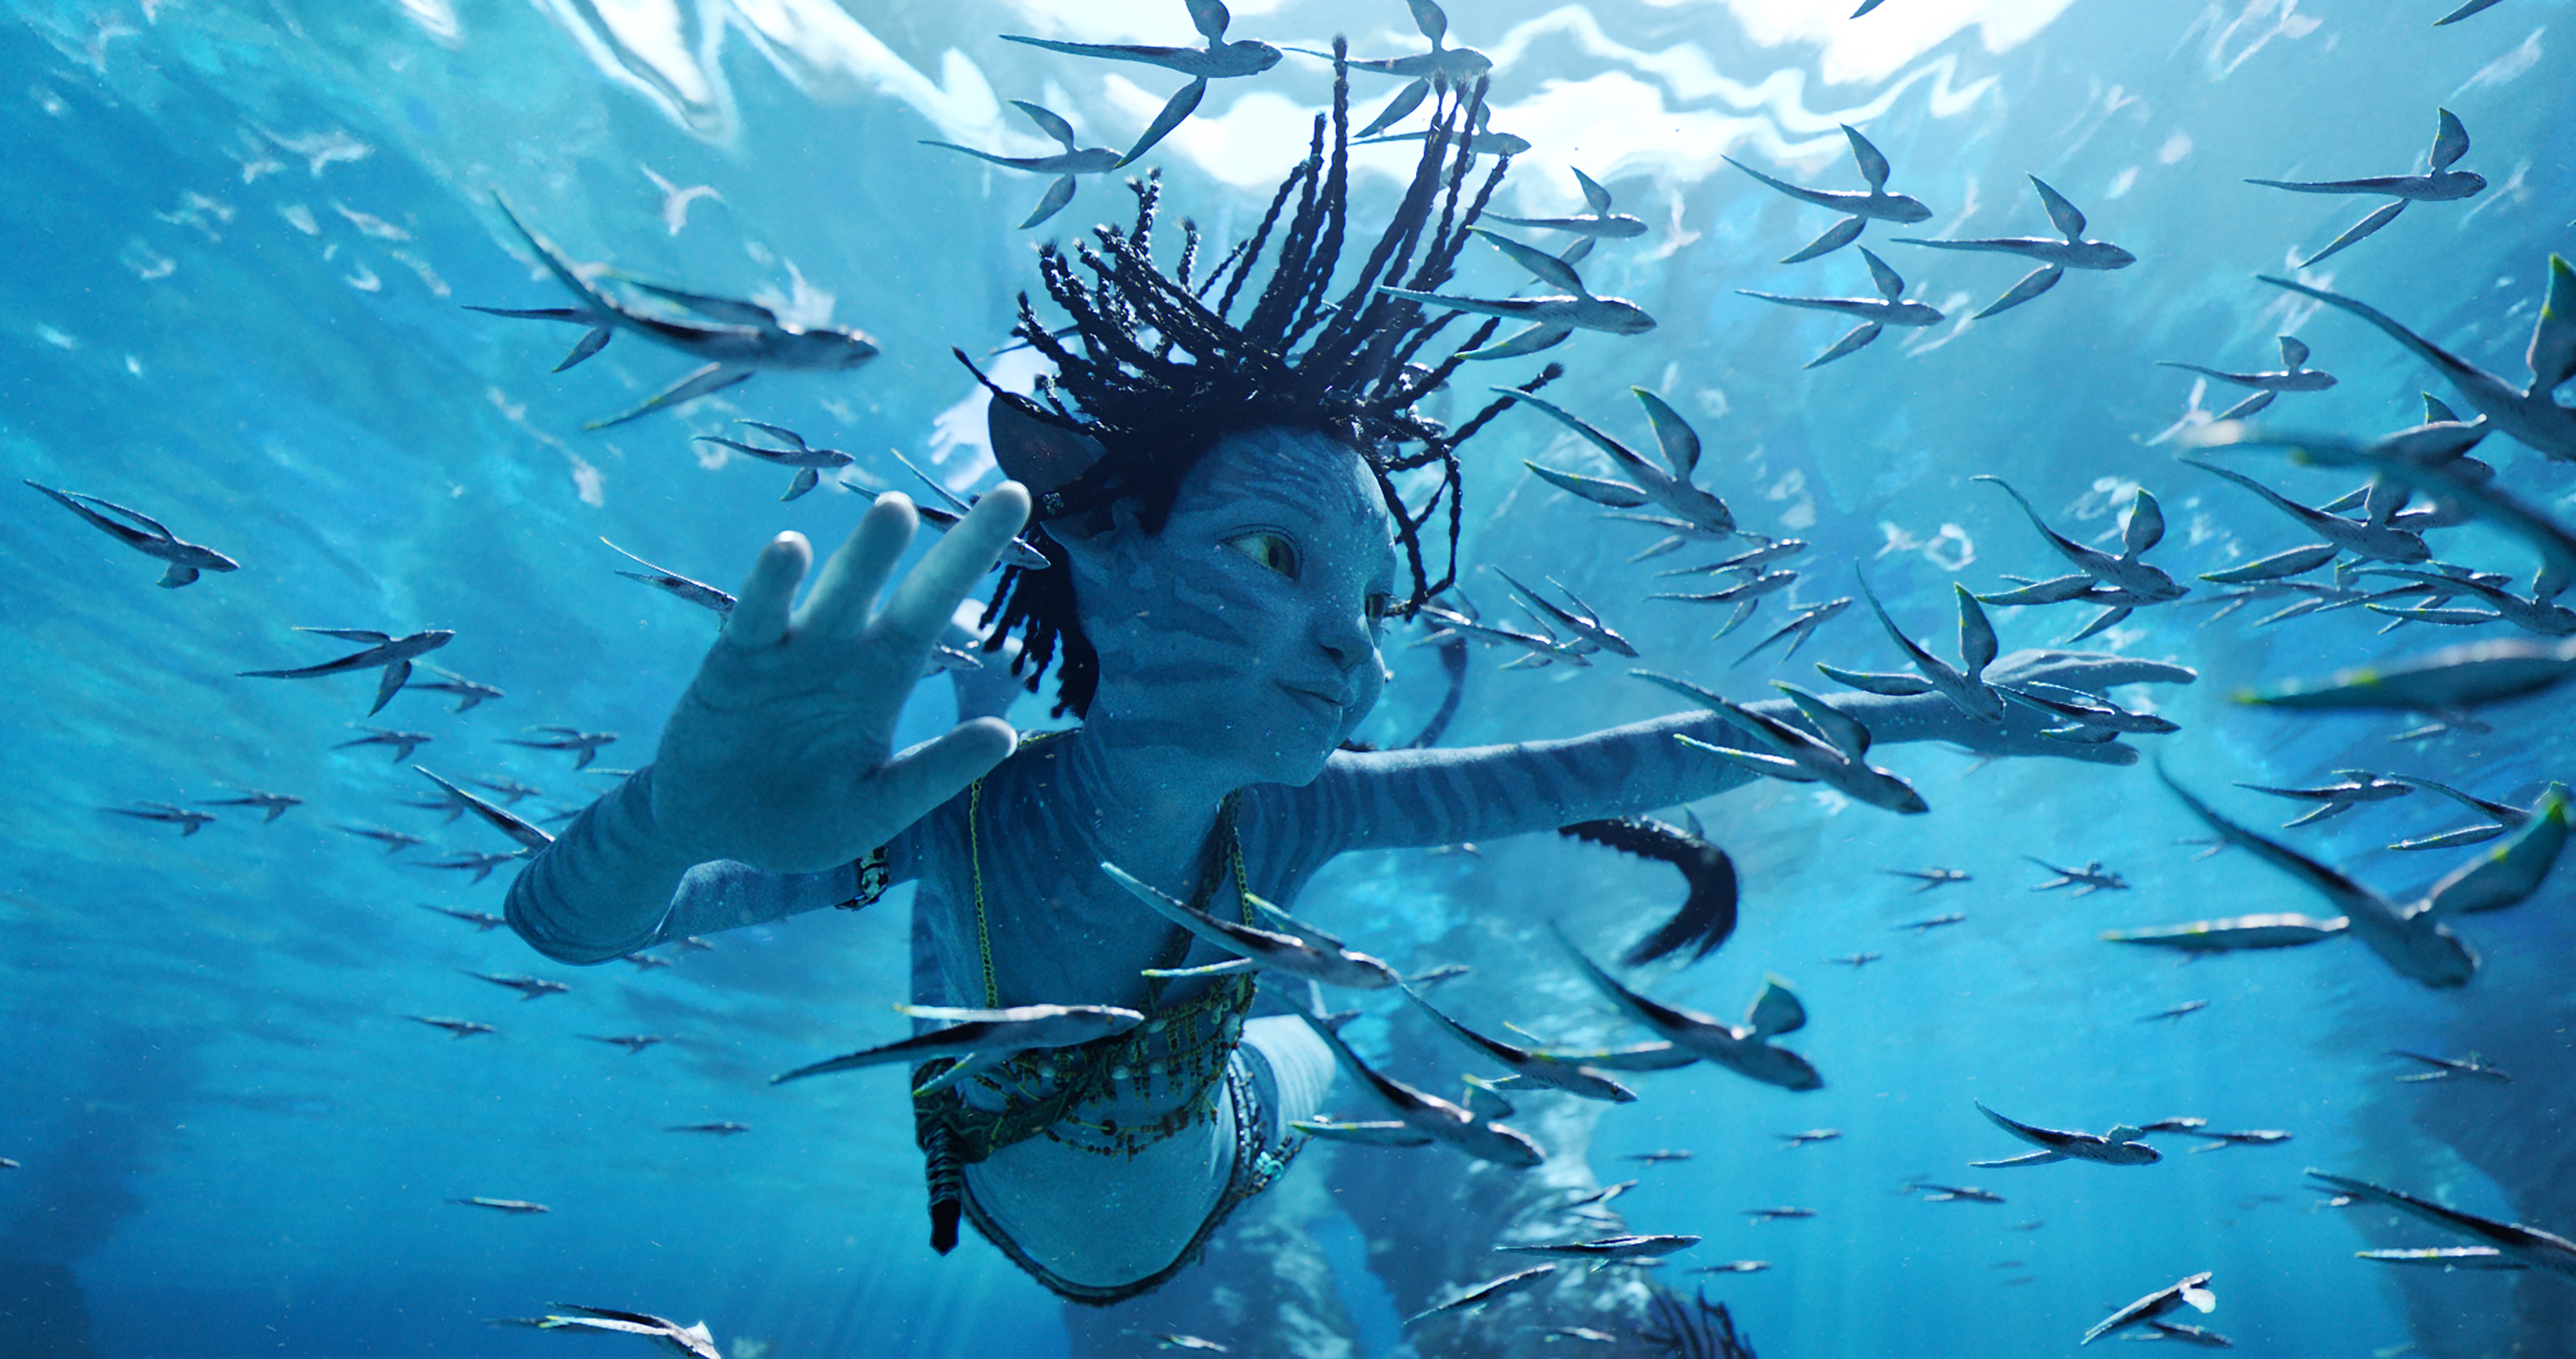 A young Na’vi child named Tuk (Trinity Bliss) swims underwater with her braids floating around her as she examines a school of tiny fish in Avatar: The Way of Water